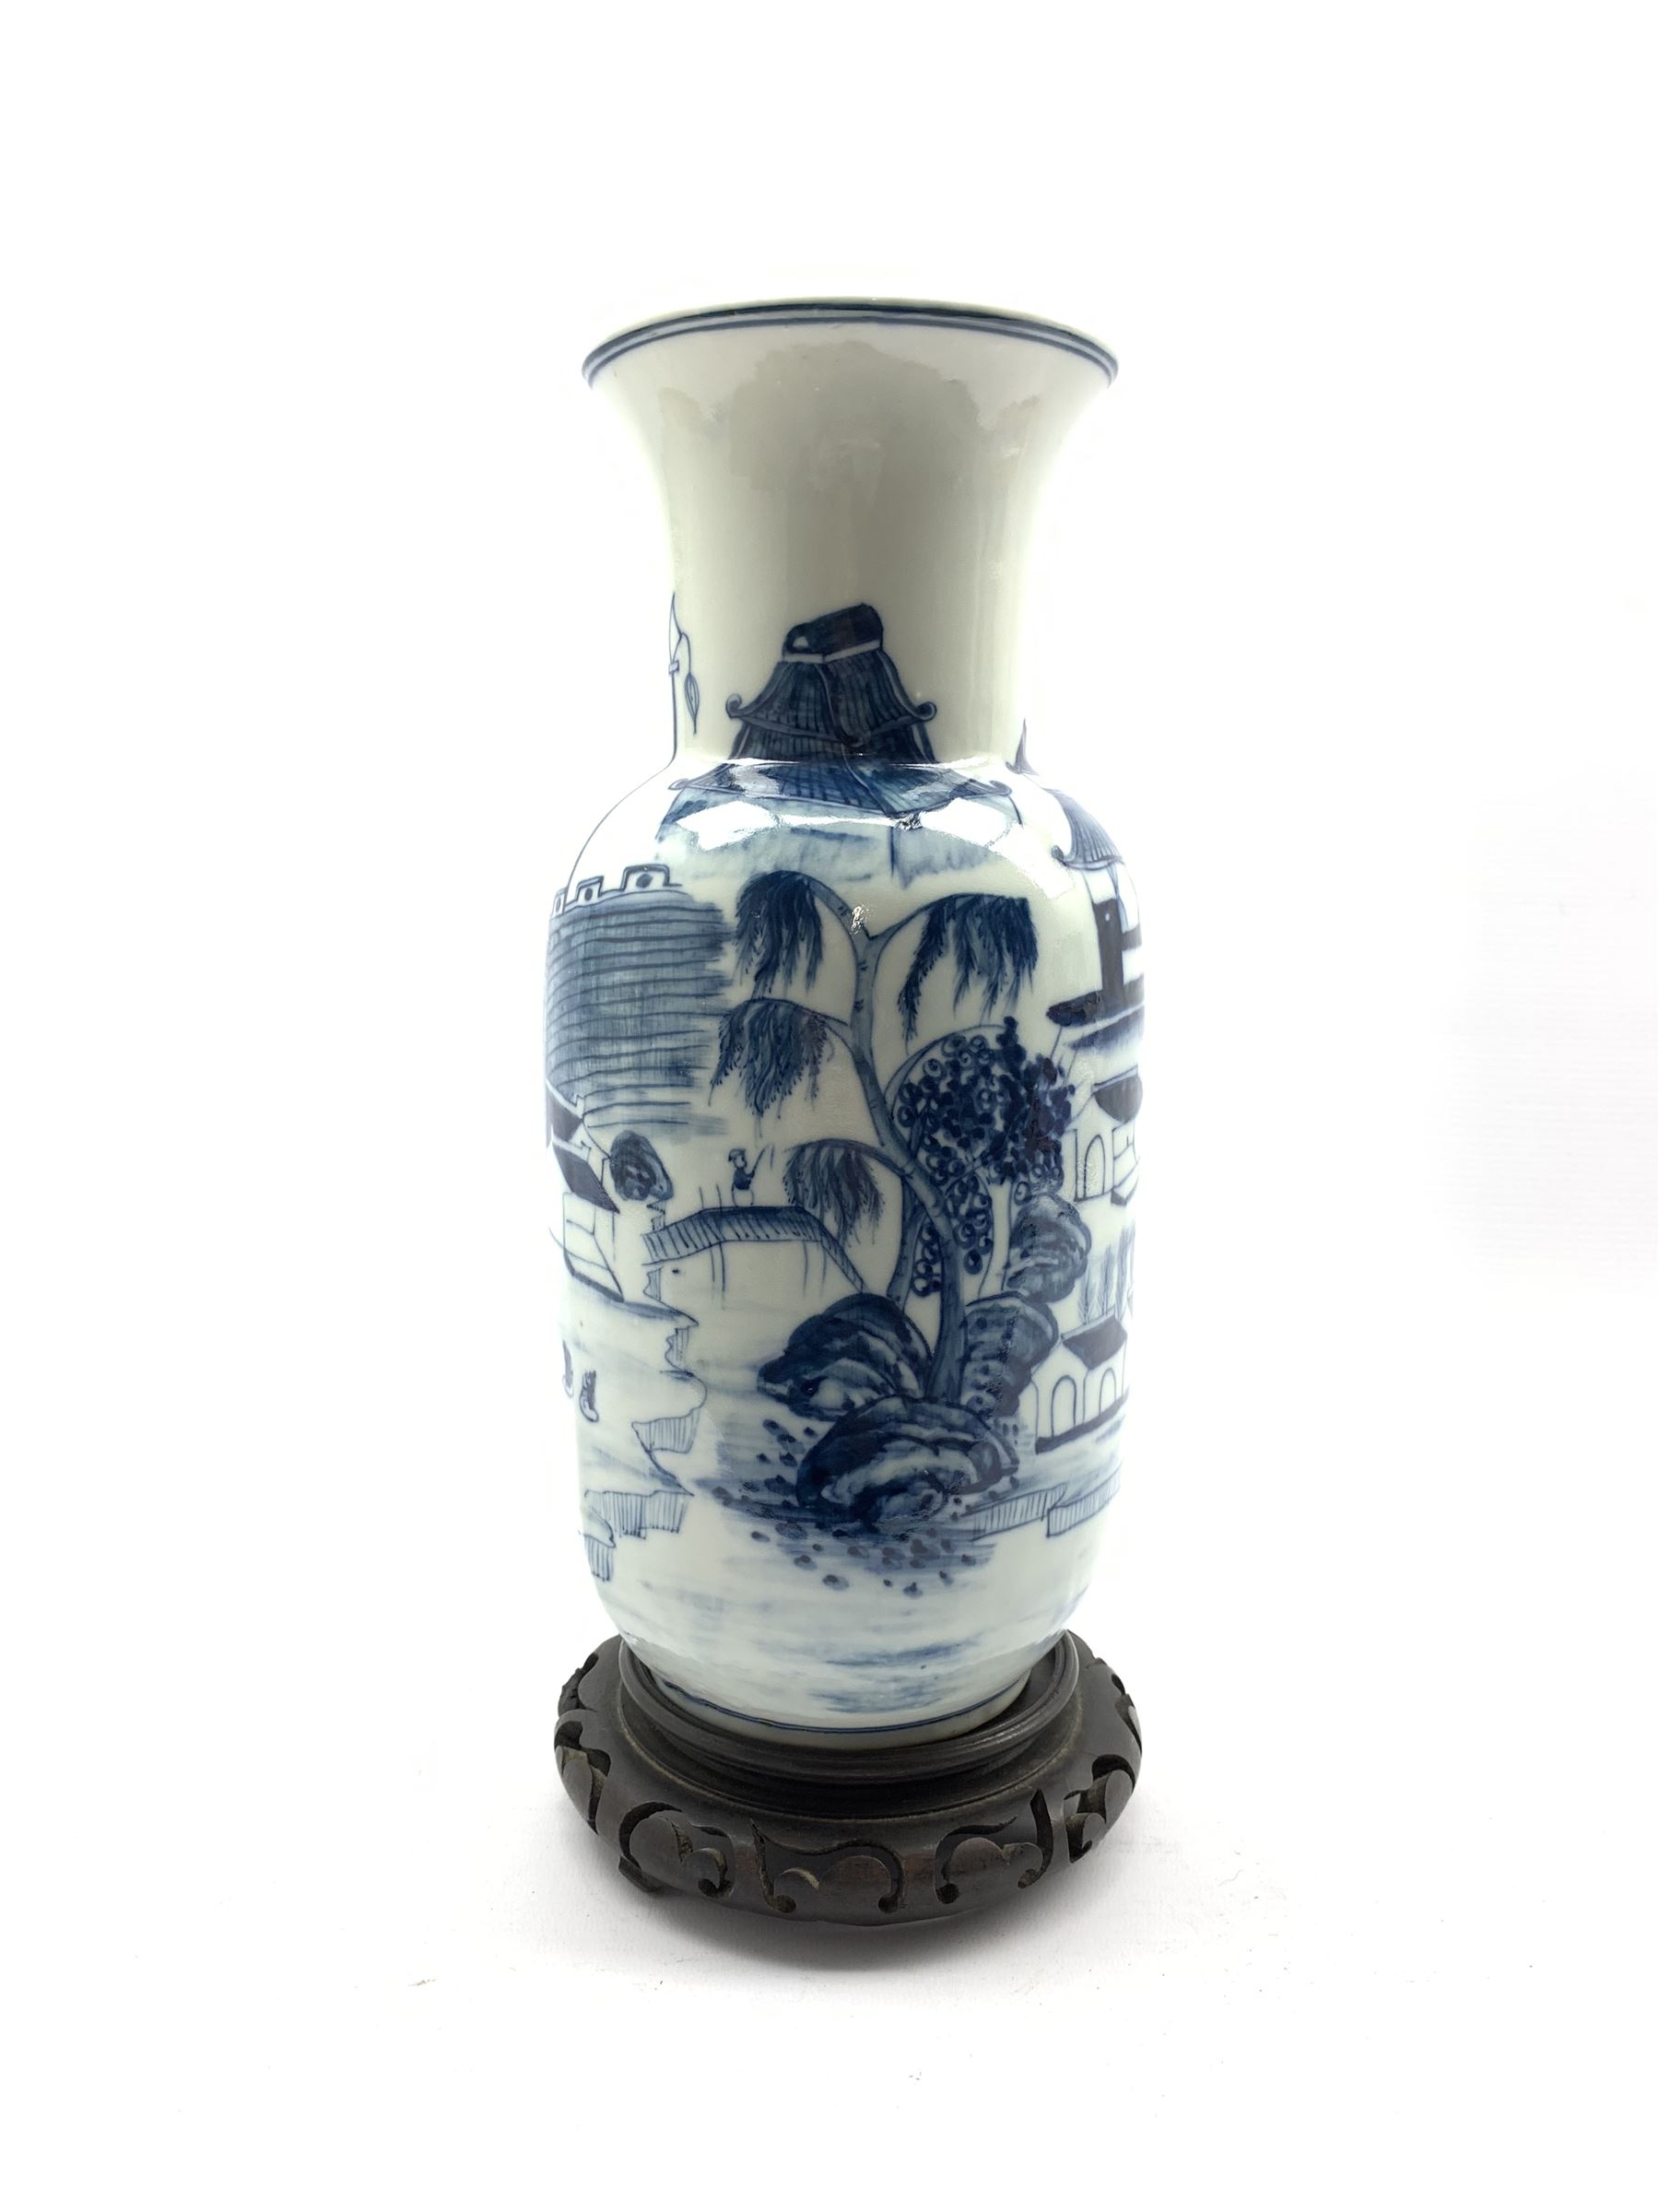 20th century Chinese blue and white vase decorated with a scene of figures in a courtyard setting - Image 2 of 3